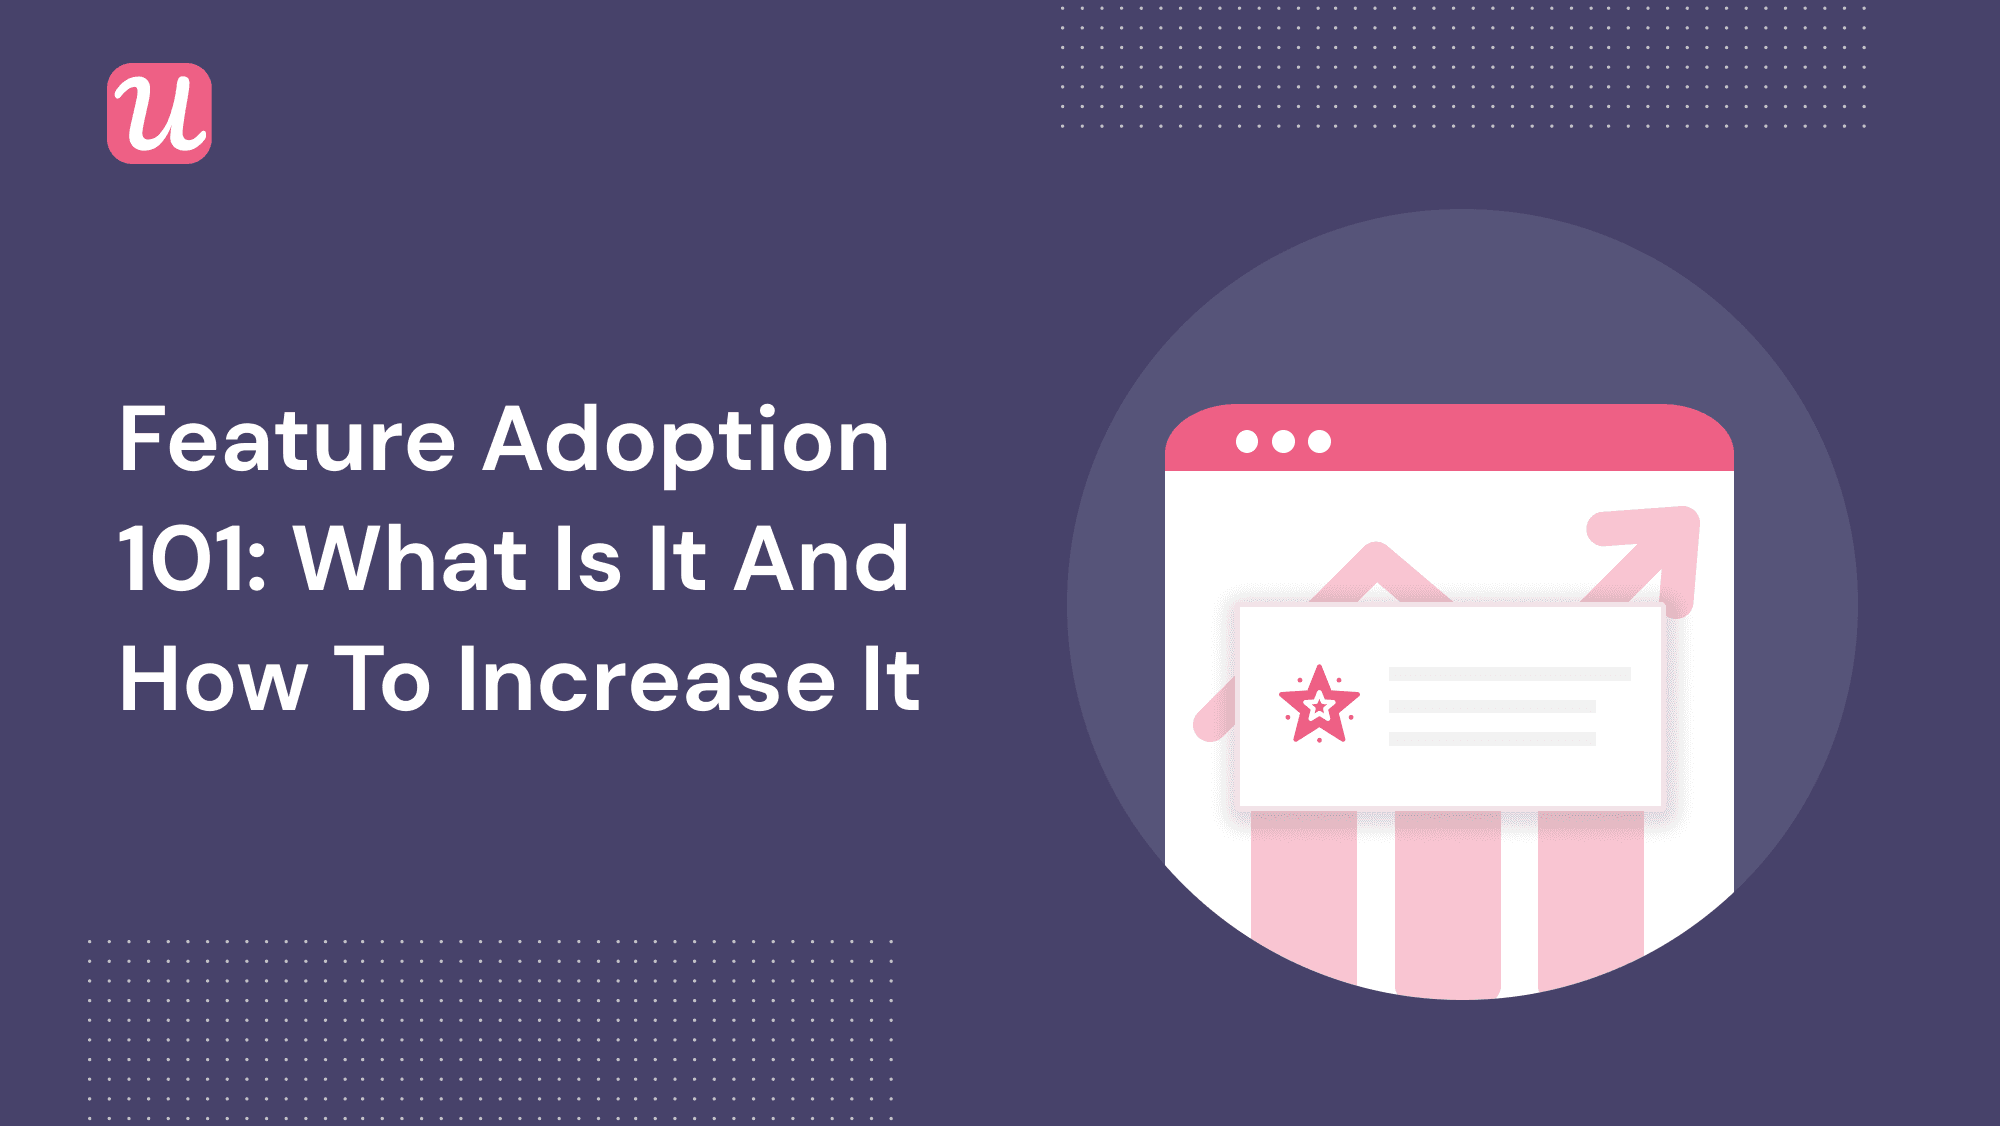 Feature Adoption 101: What Is It And How To Increase It